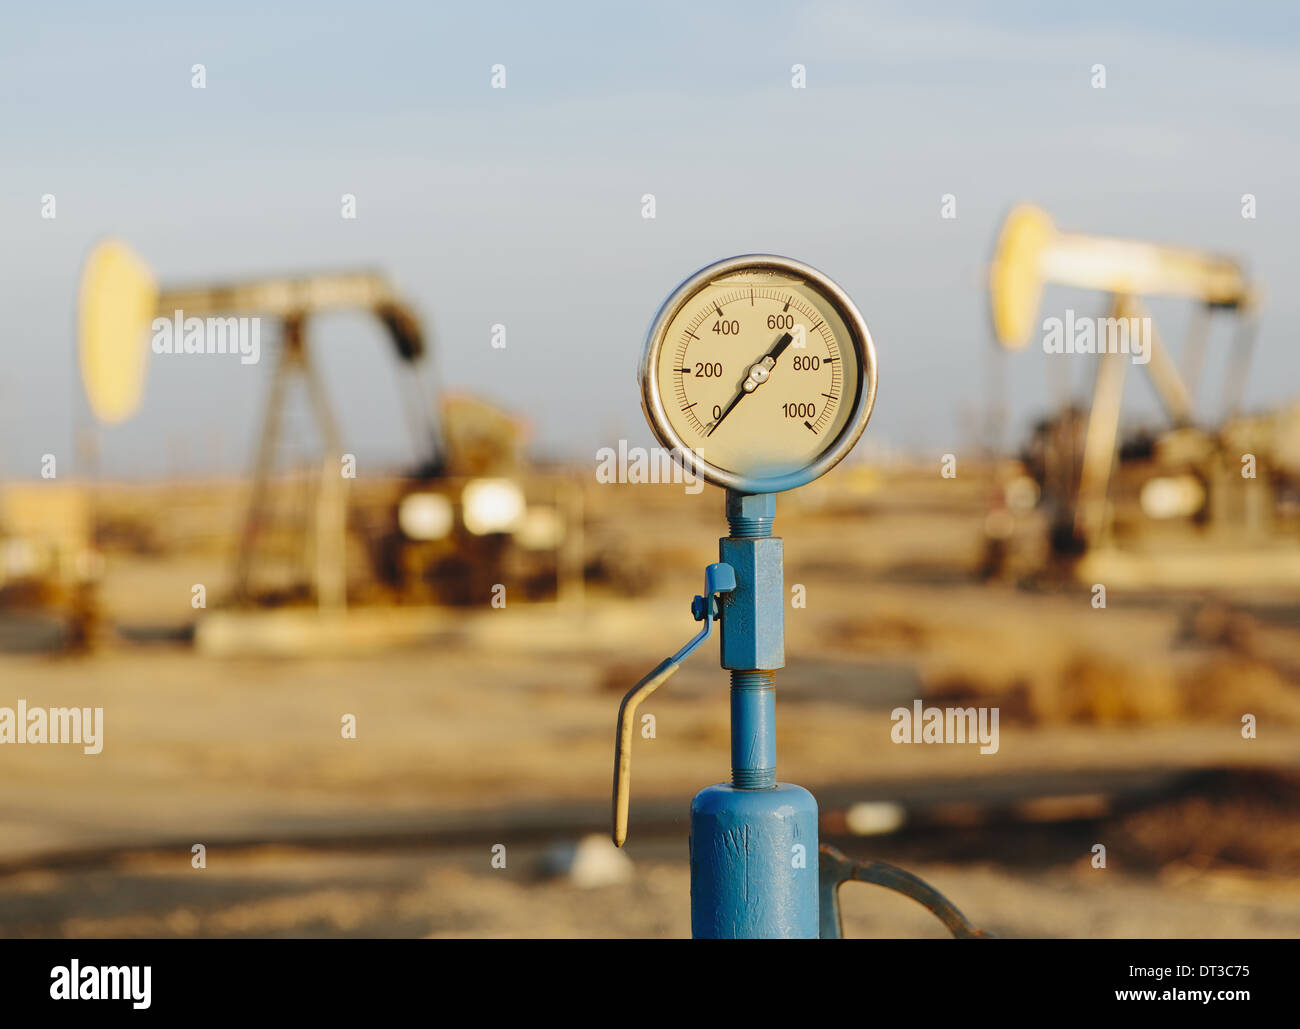 Air pressure gauge, oil rigs in background, Sunset-Midway oil fields, the largest in California. Stock Photo